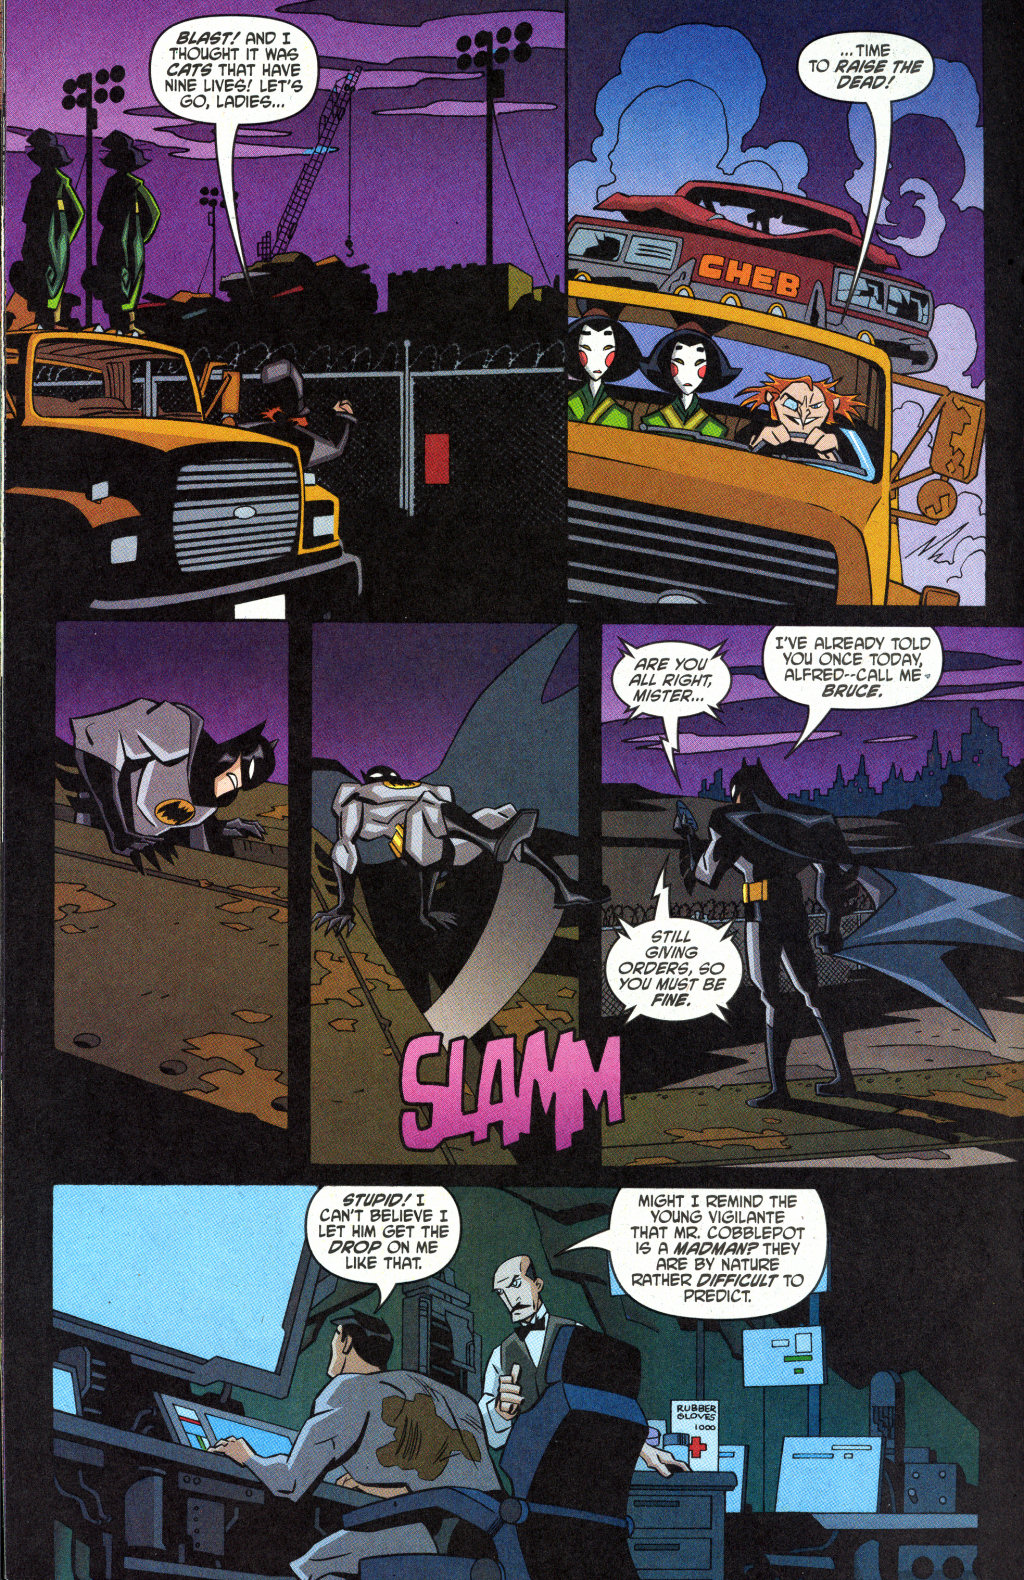 The Batman Strikes! issue 1 (Burger King Giveaway Edition) - Page 18